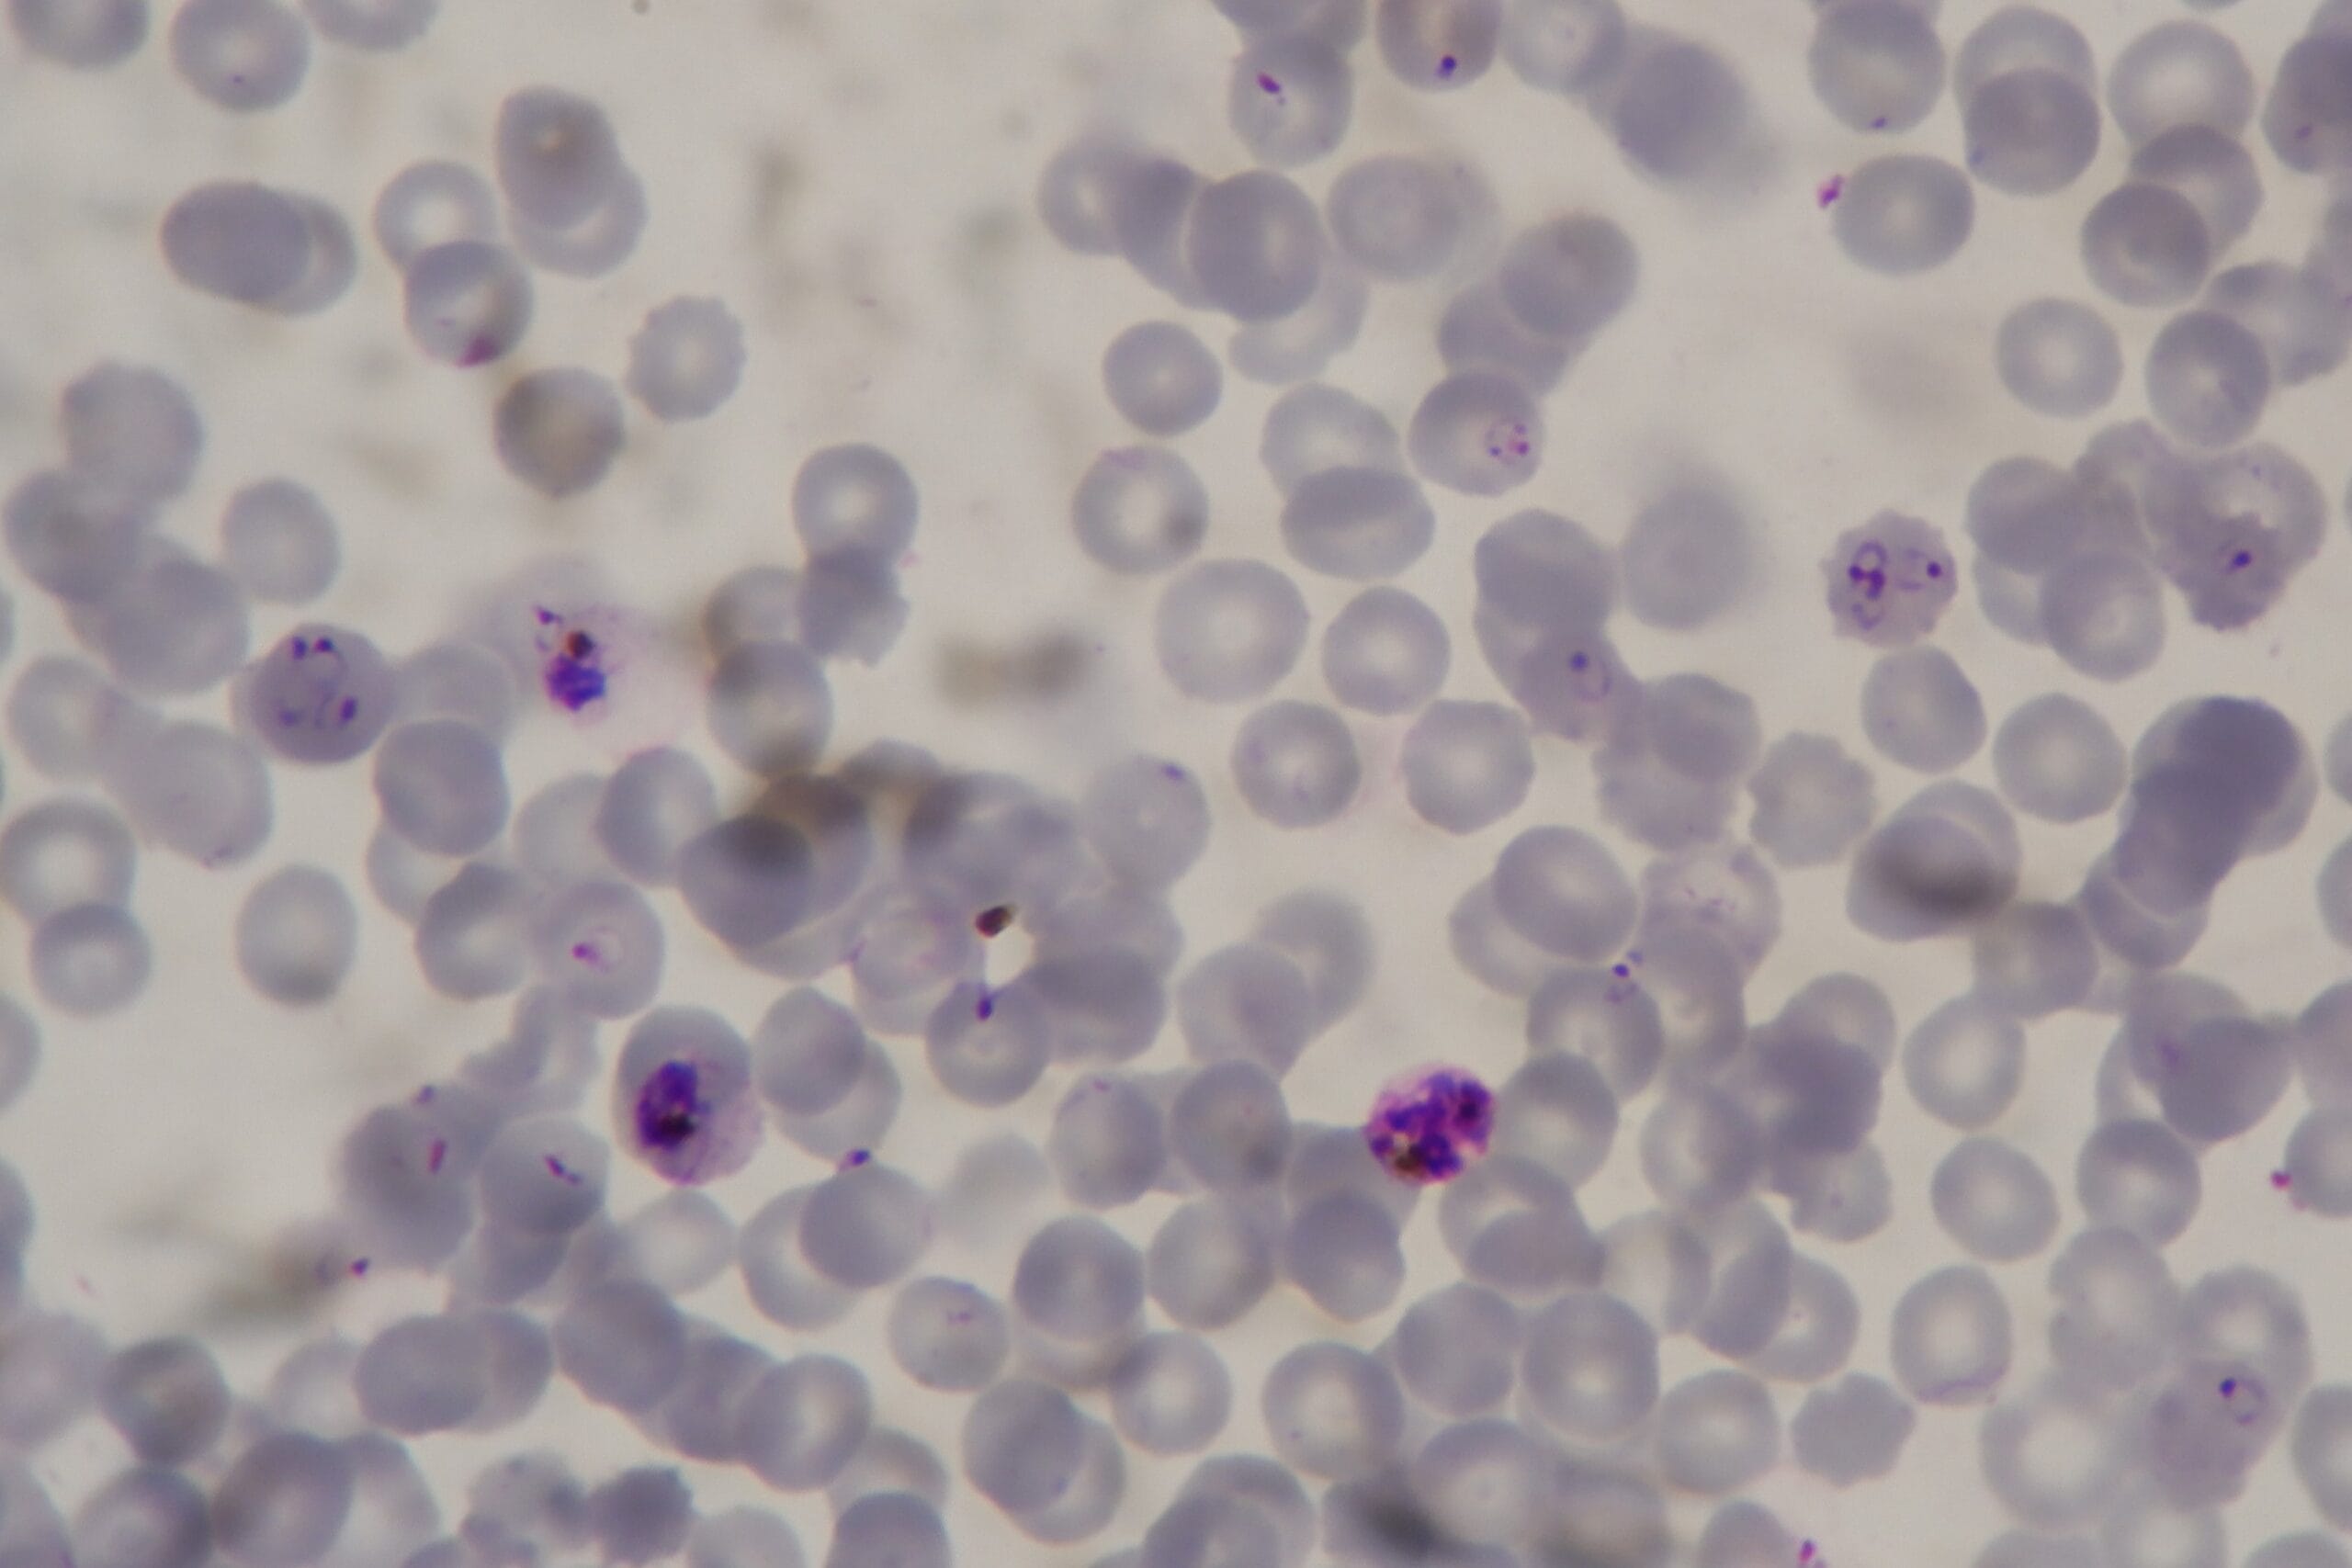 Malaria parasites in blood sample under the microscope